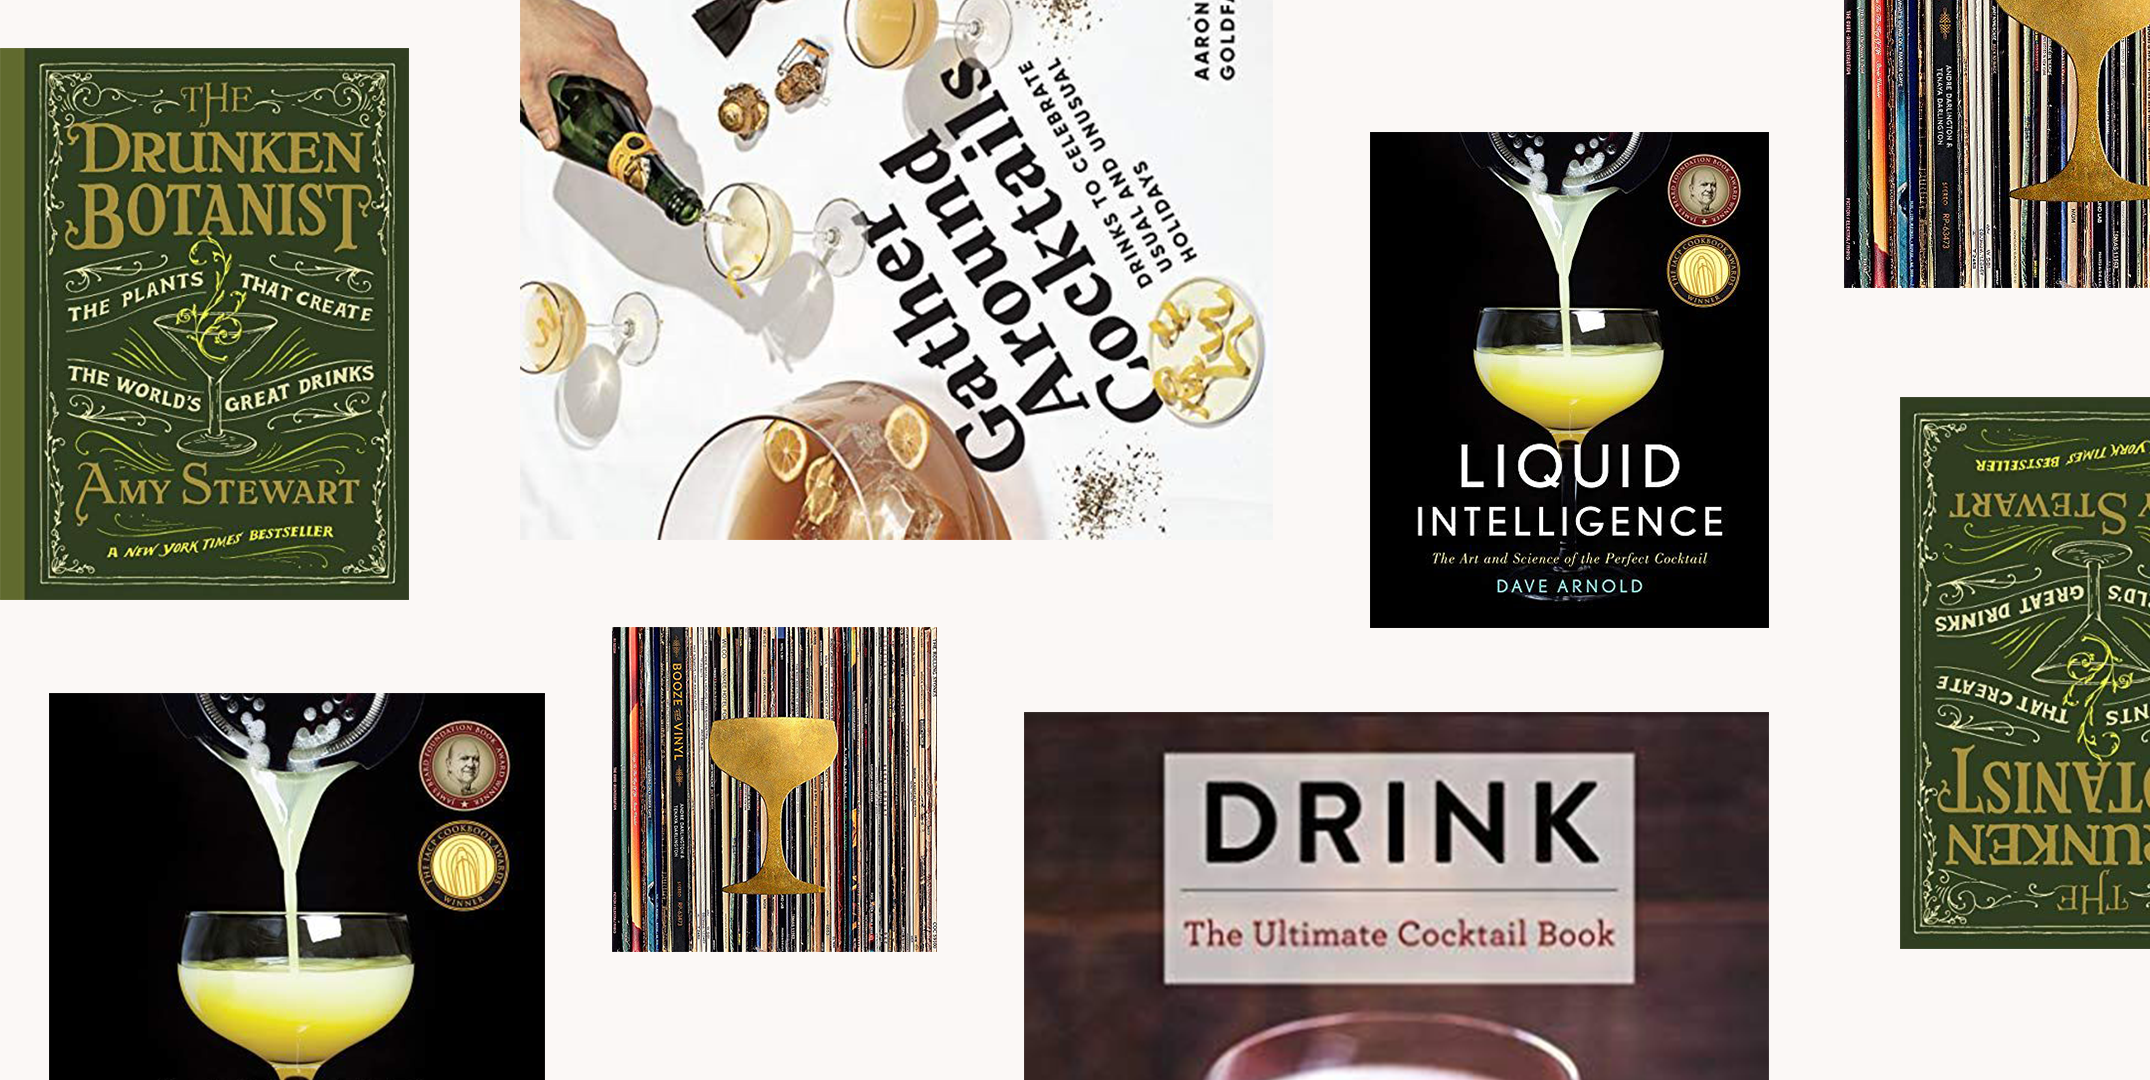 13 Best Cocktail Books of 2018 - Mixology and Drink Recipe Books